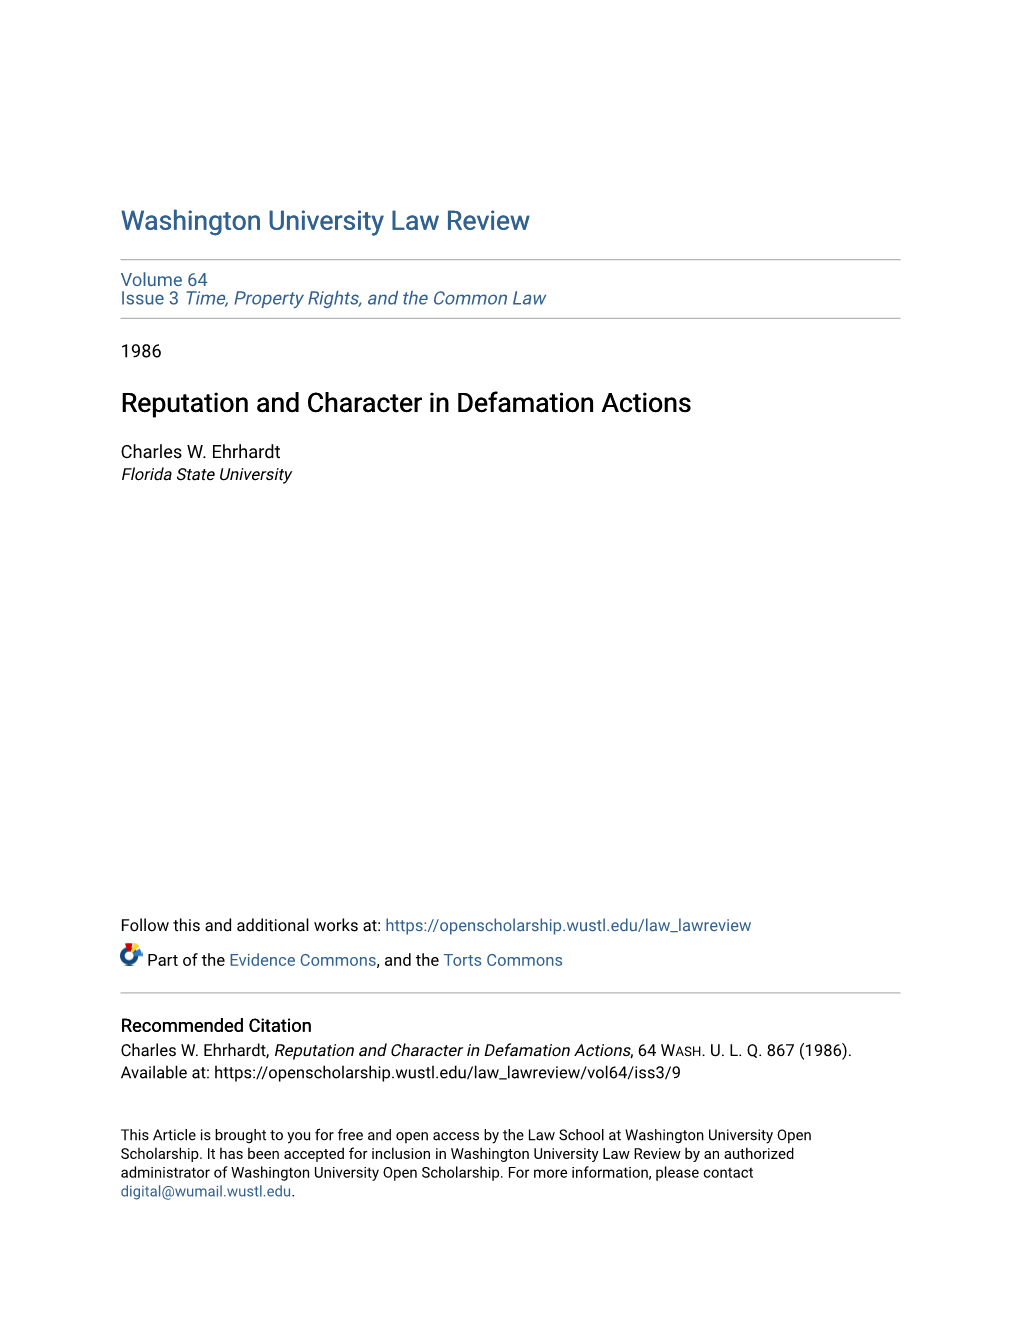 Reputation and Character in Defamation Actions